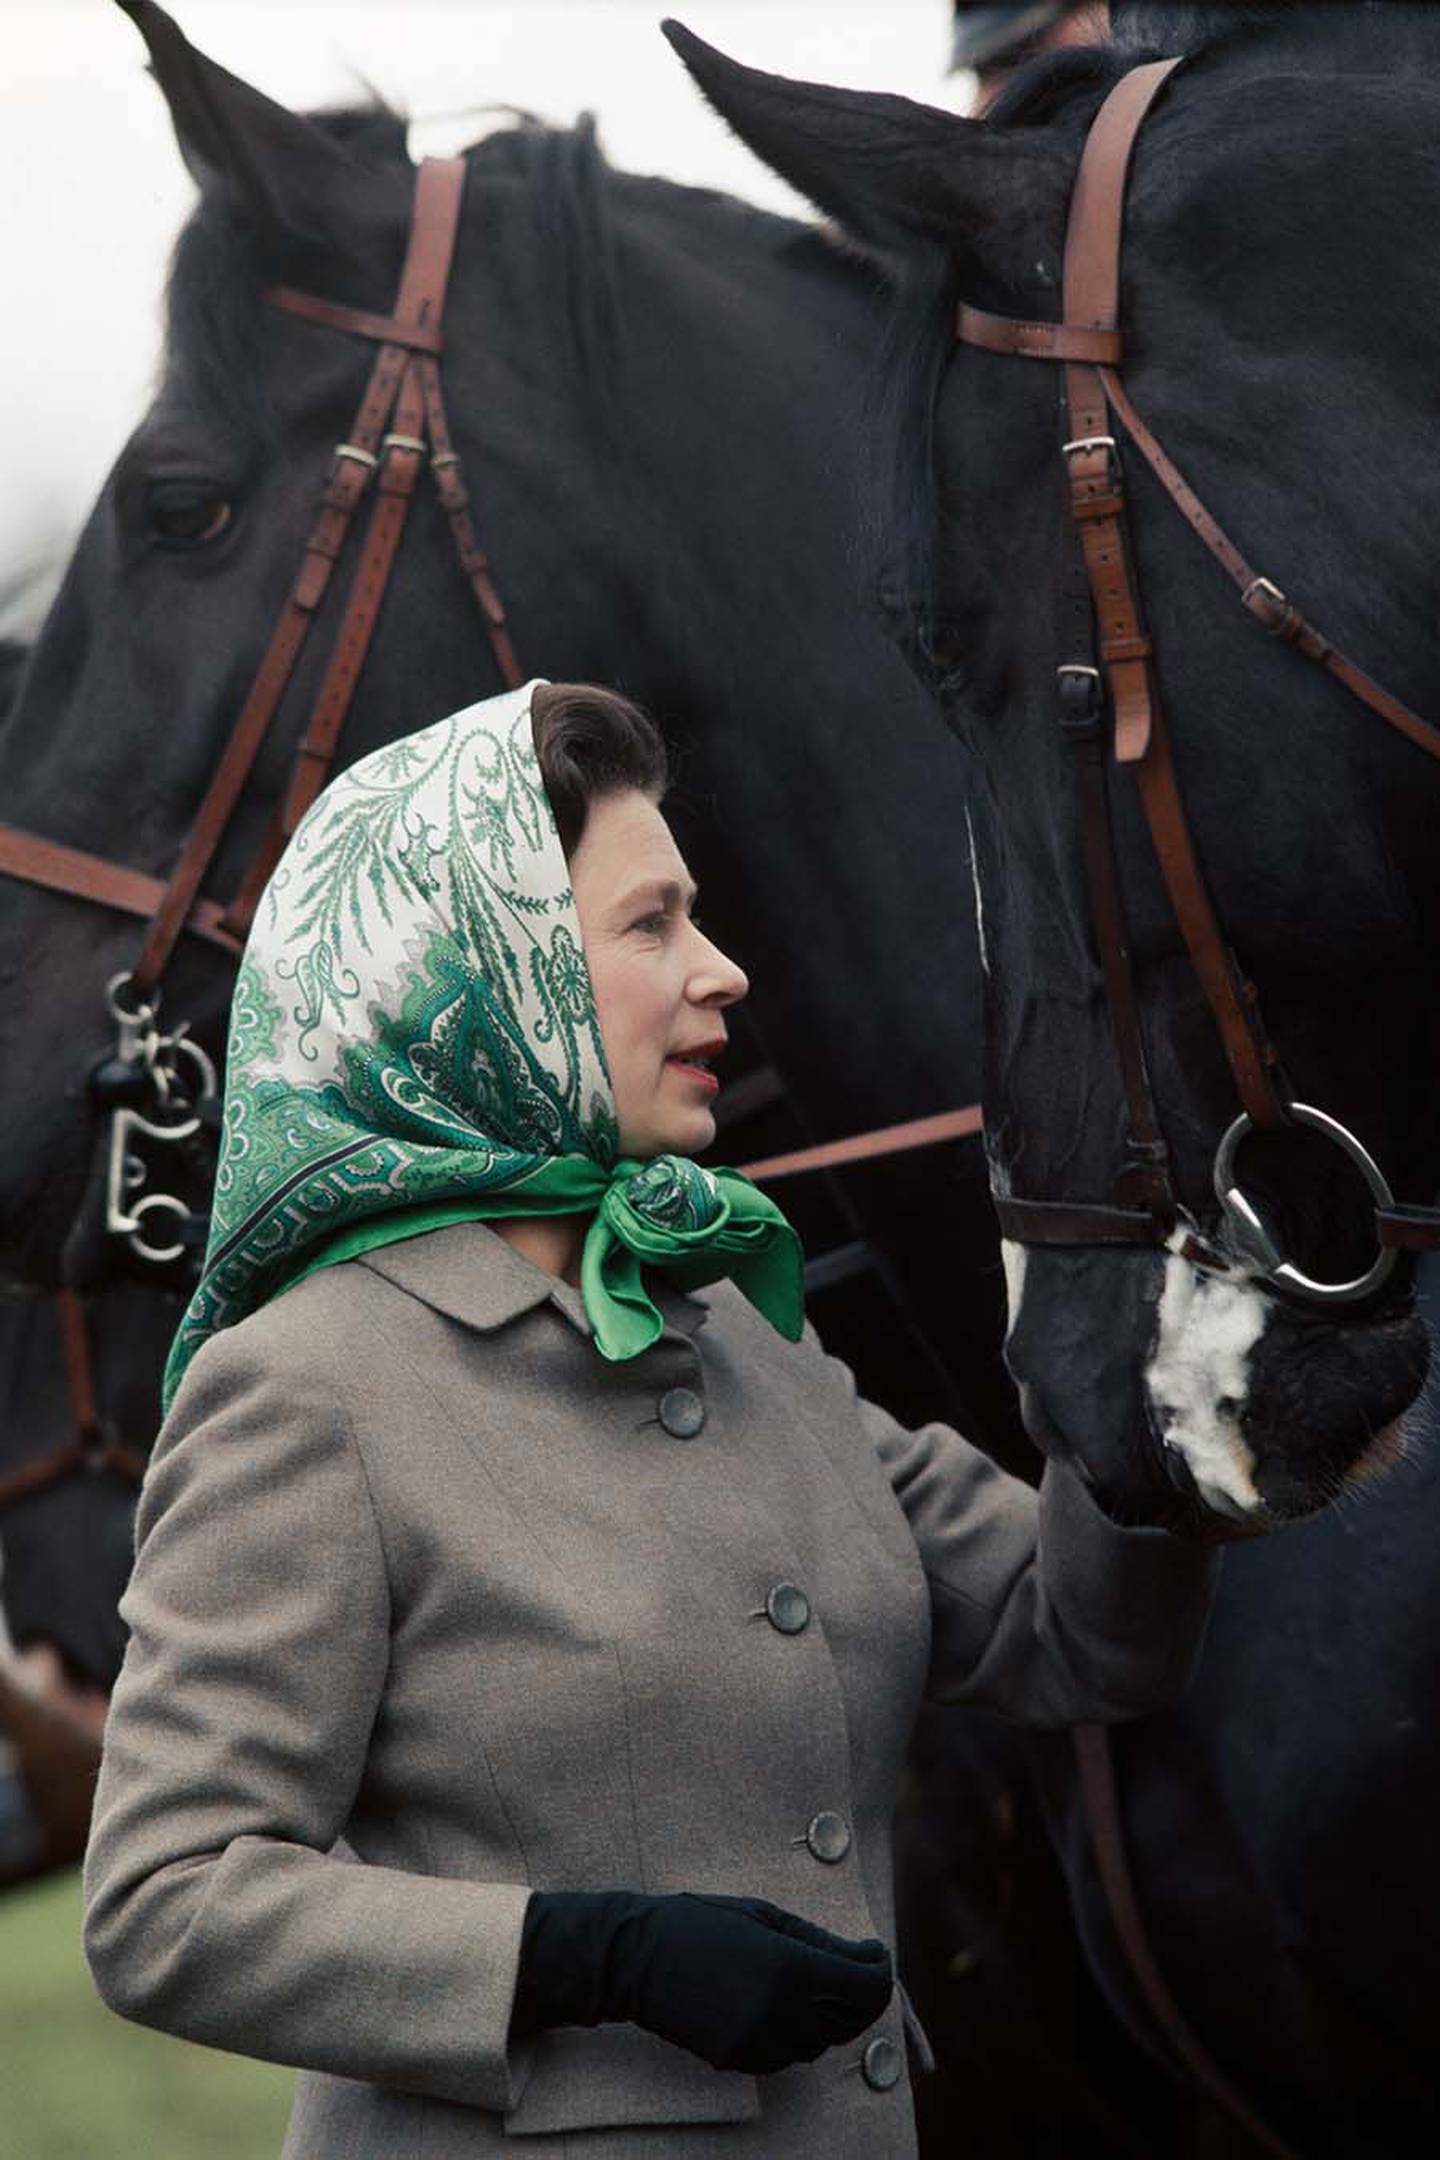 Queen Elizabeth’s style was an inspiration for fashion designers from Vivienne Westwood to Alessandro Michele to Richard Quinn.